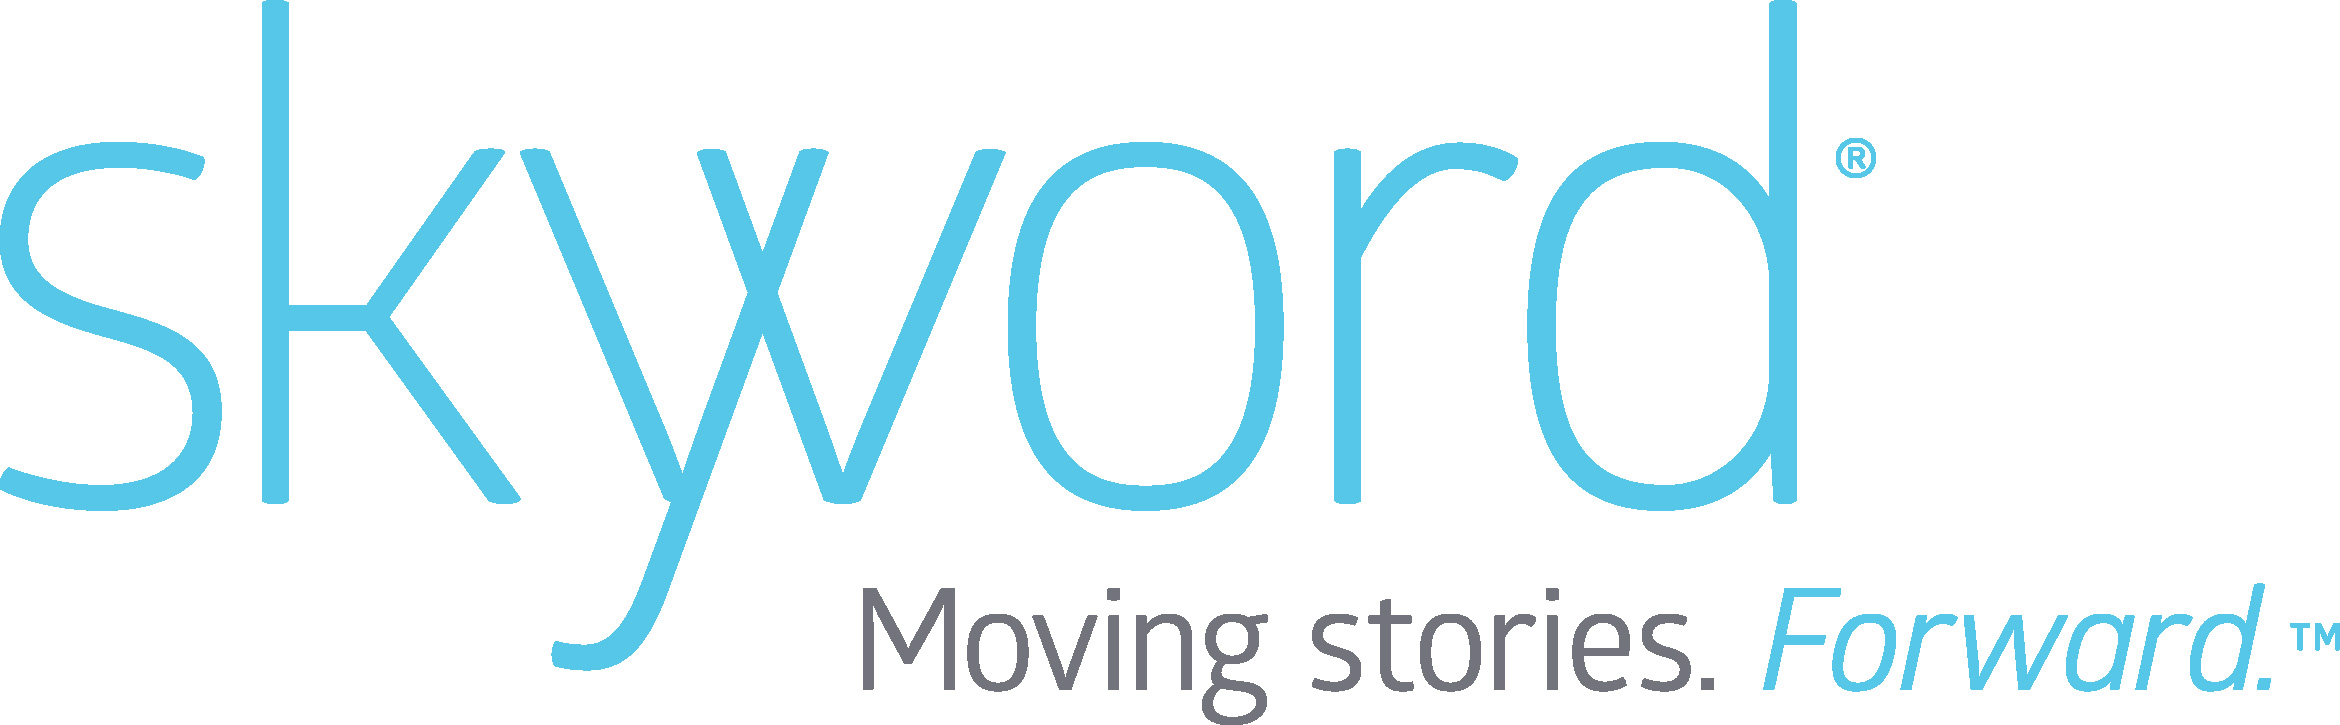 The Skyword logo with the tagline, "Moving stories. Forward. (TM)"